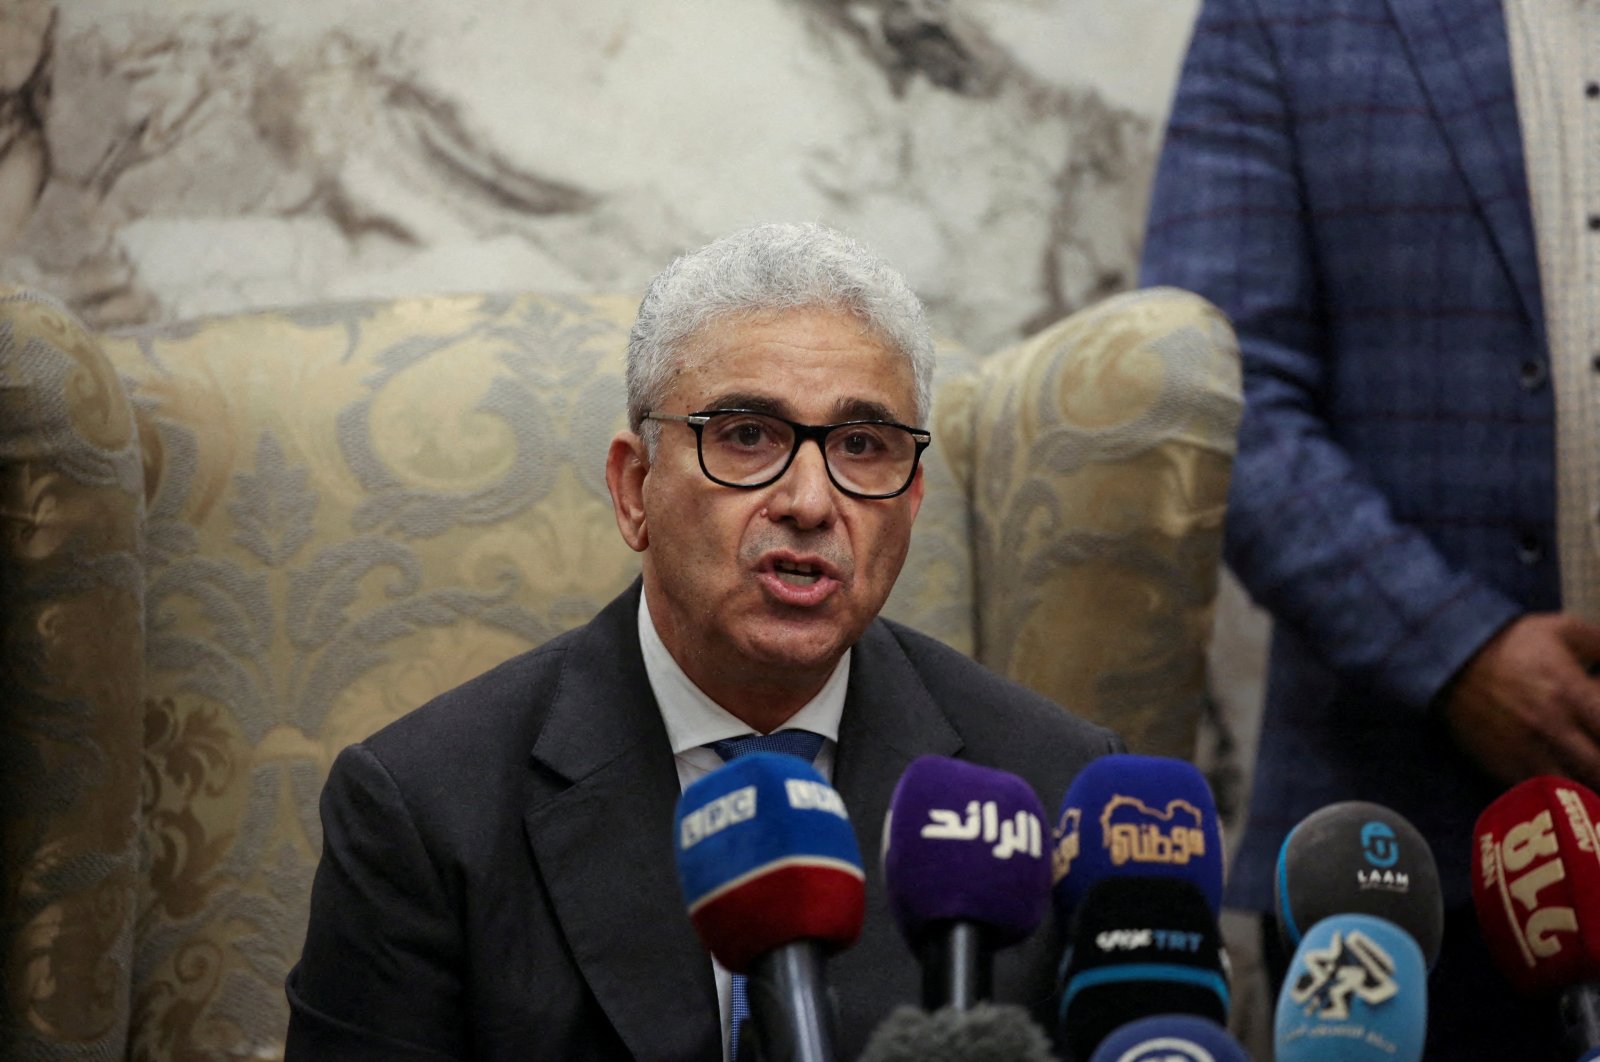 Libya's Bashagha expects to take over peacefully